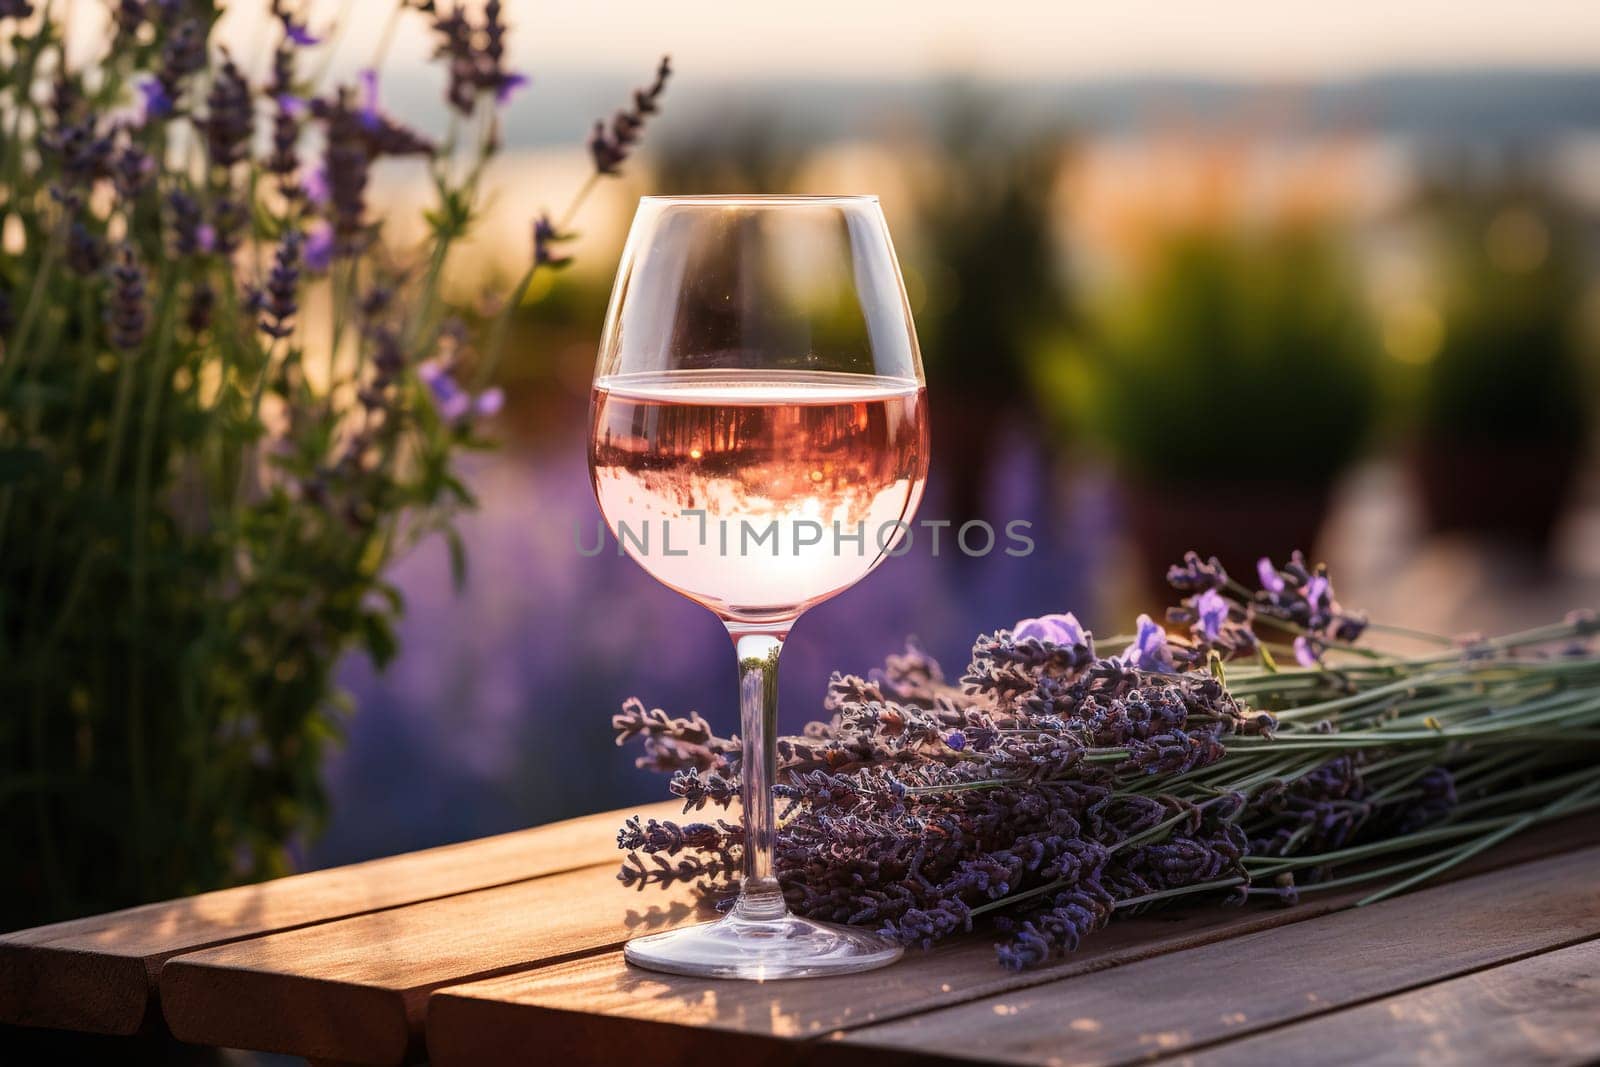 A glass of lavender wine on a wooden table in nature in the rays of sunset. Beautiful still life with a lavender bouquet and a glass of wine.